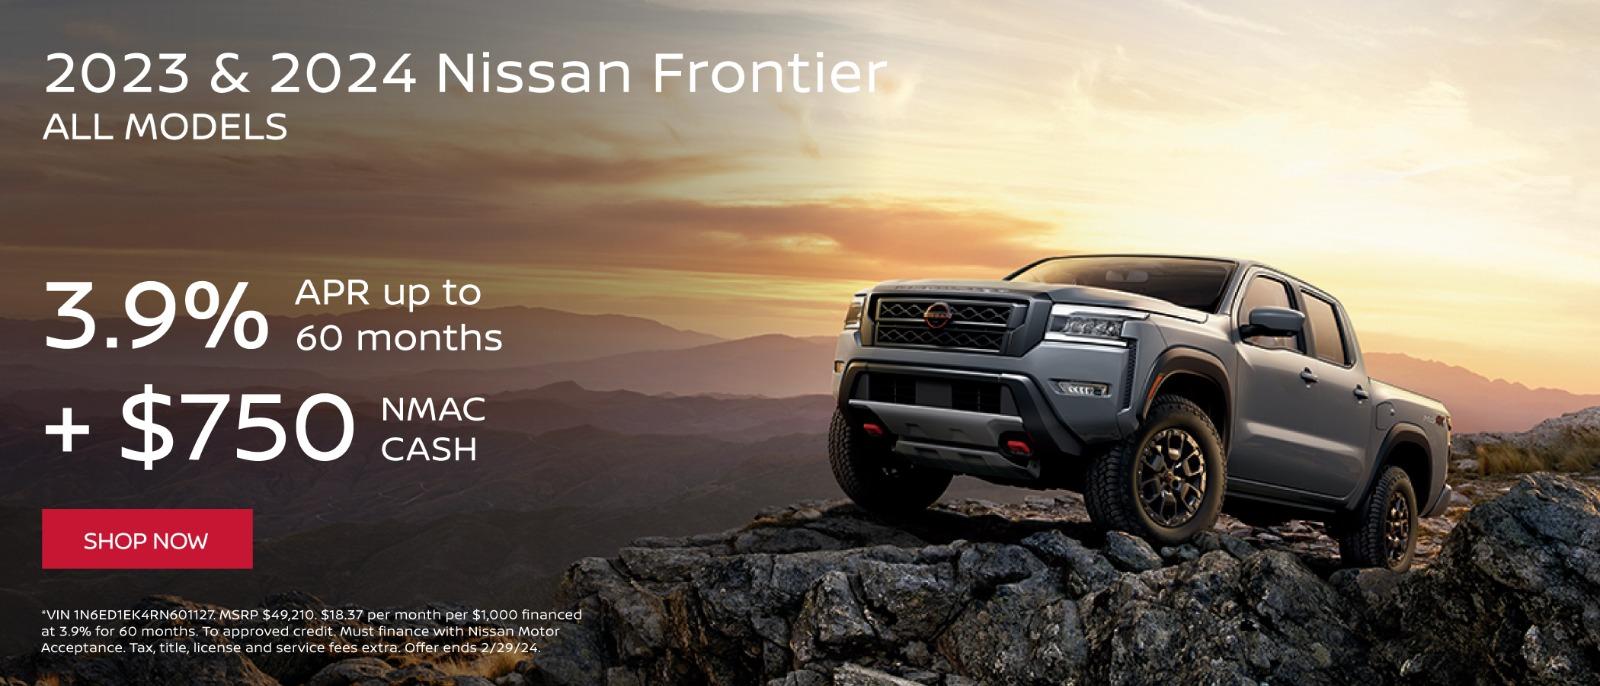 All New 2023 & 2024 Nissan Frontier | 3.99% APR up to 60 Months +750 NMAC Cash